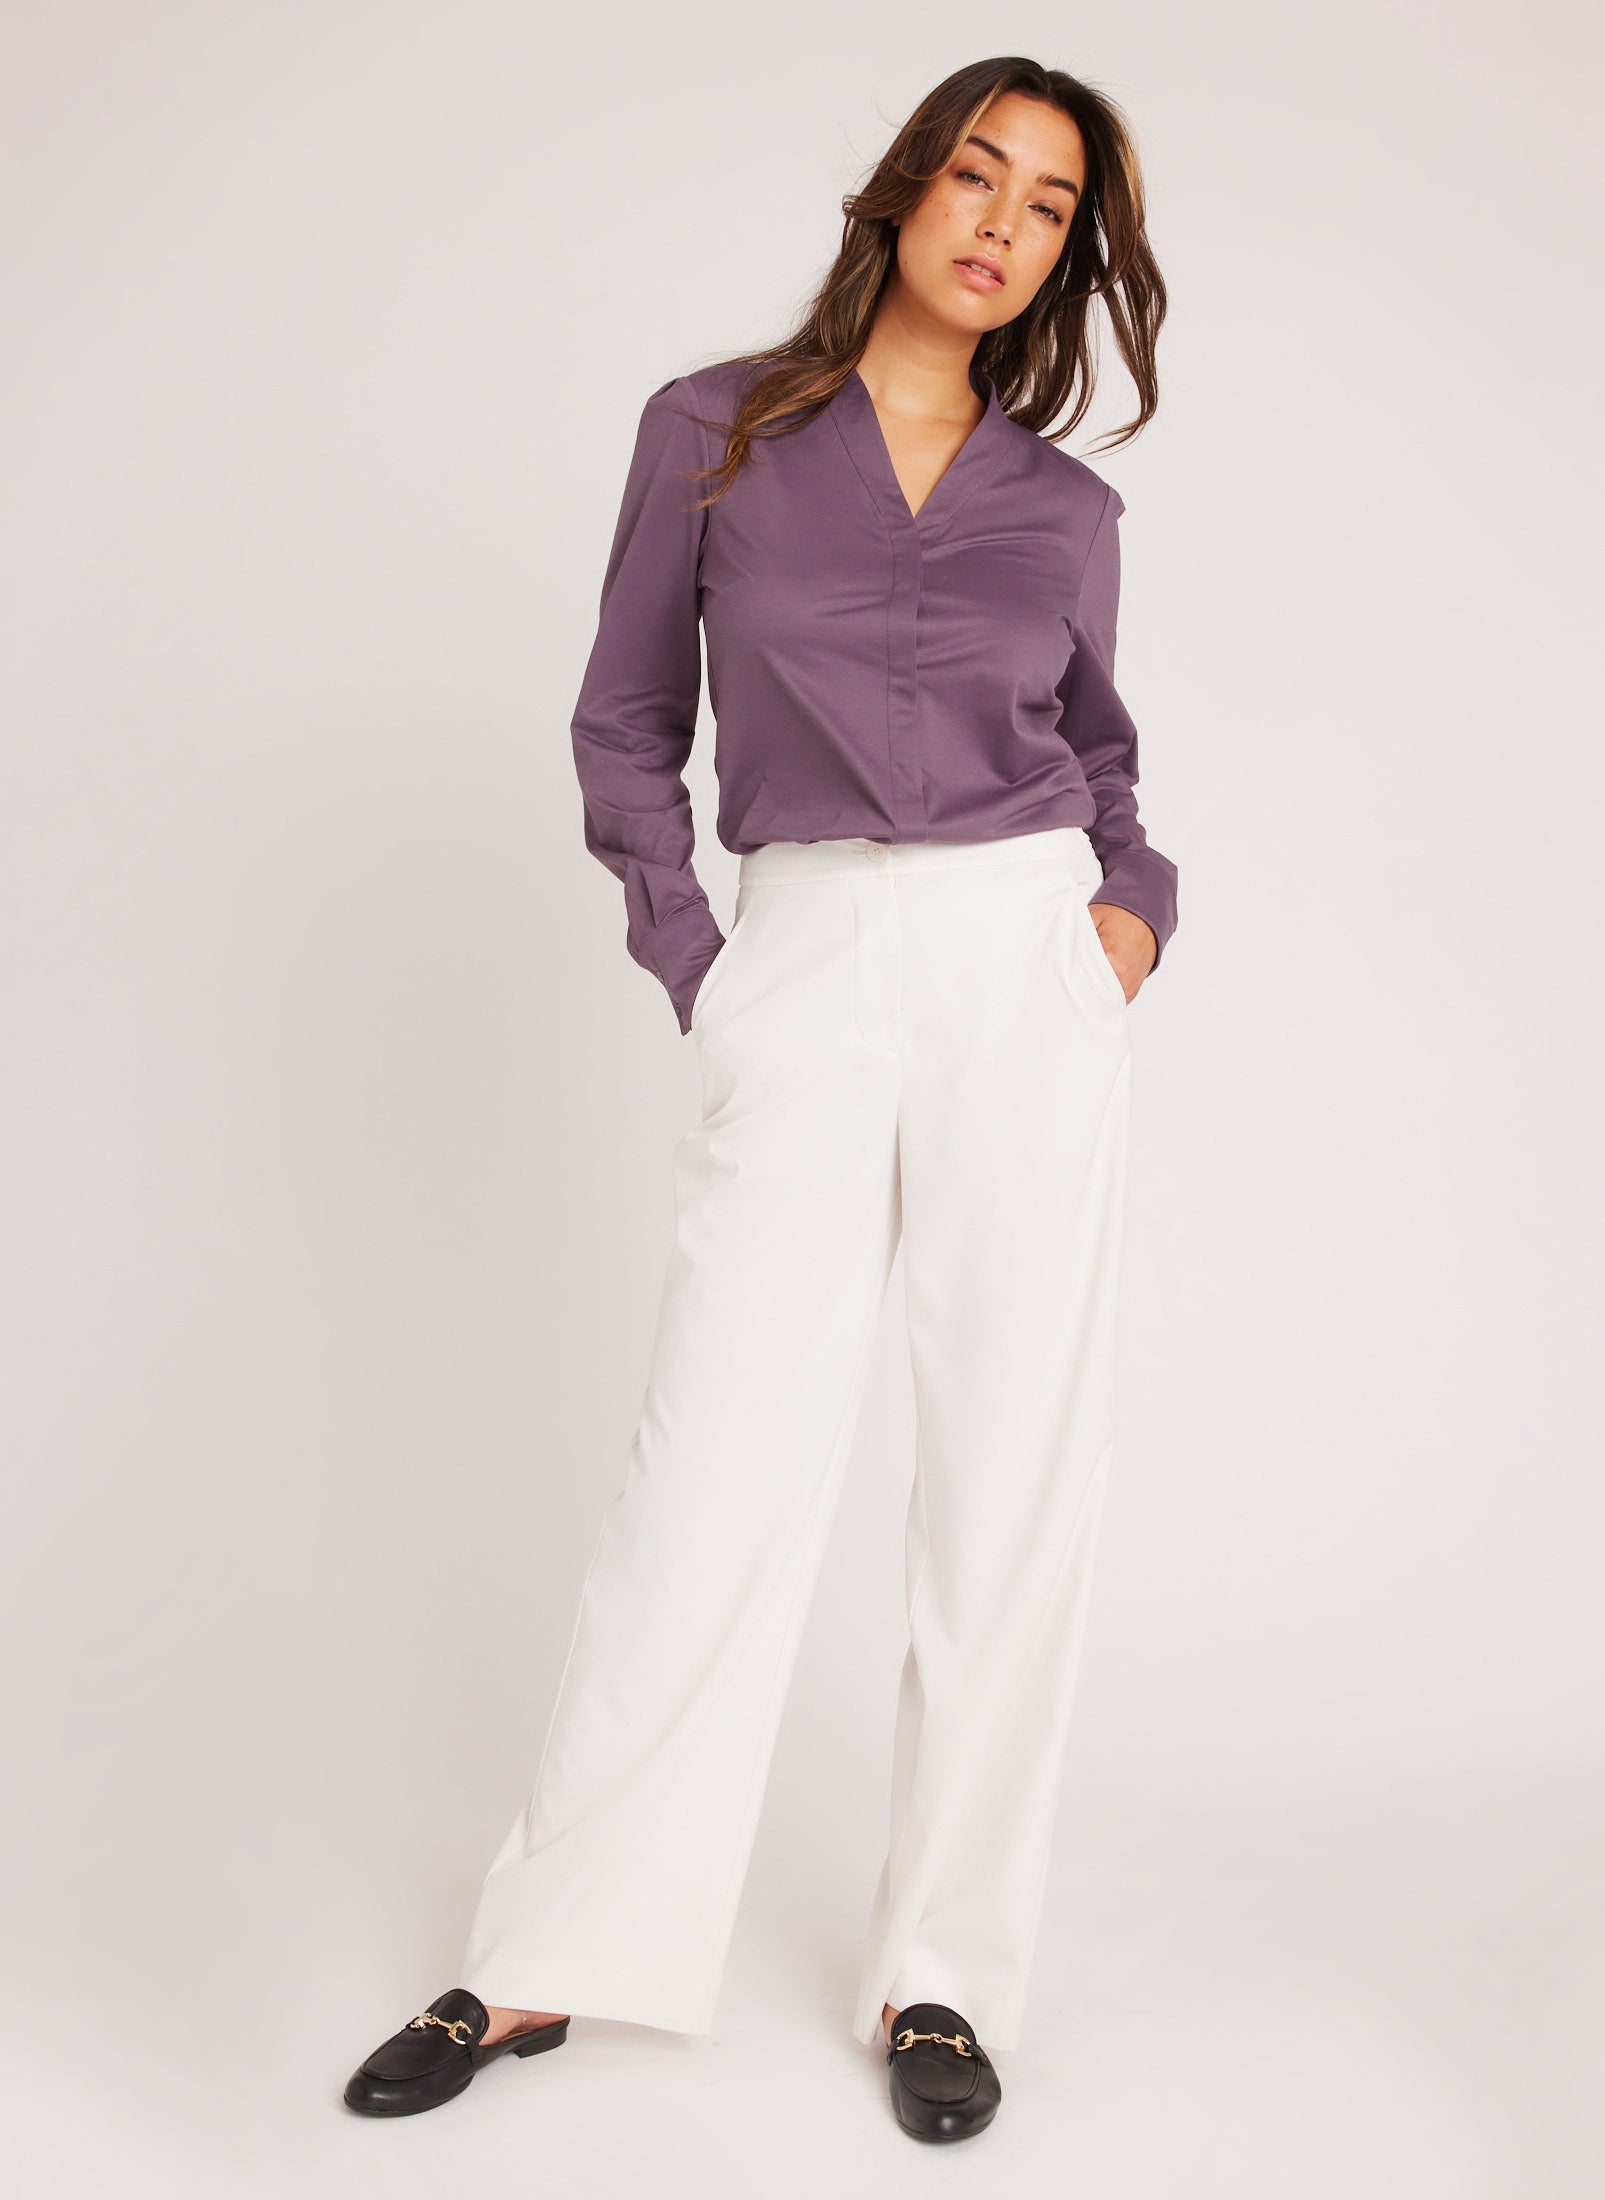 Women's Shirts & Blouses – Kit and Ace